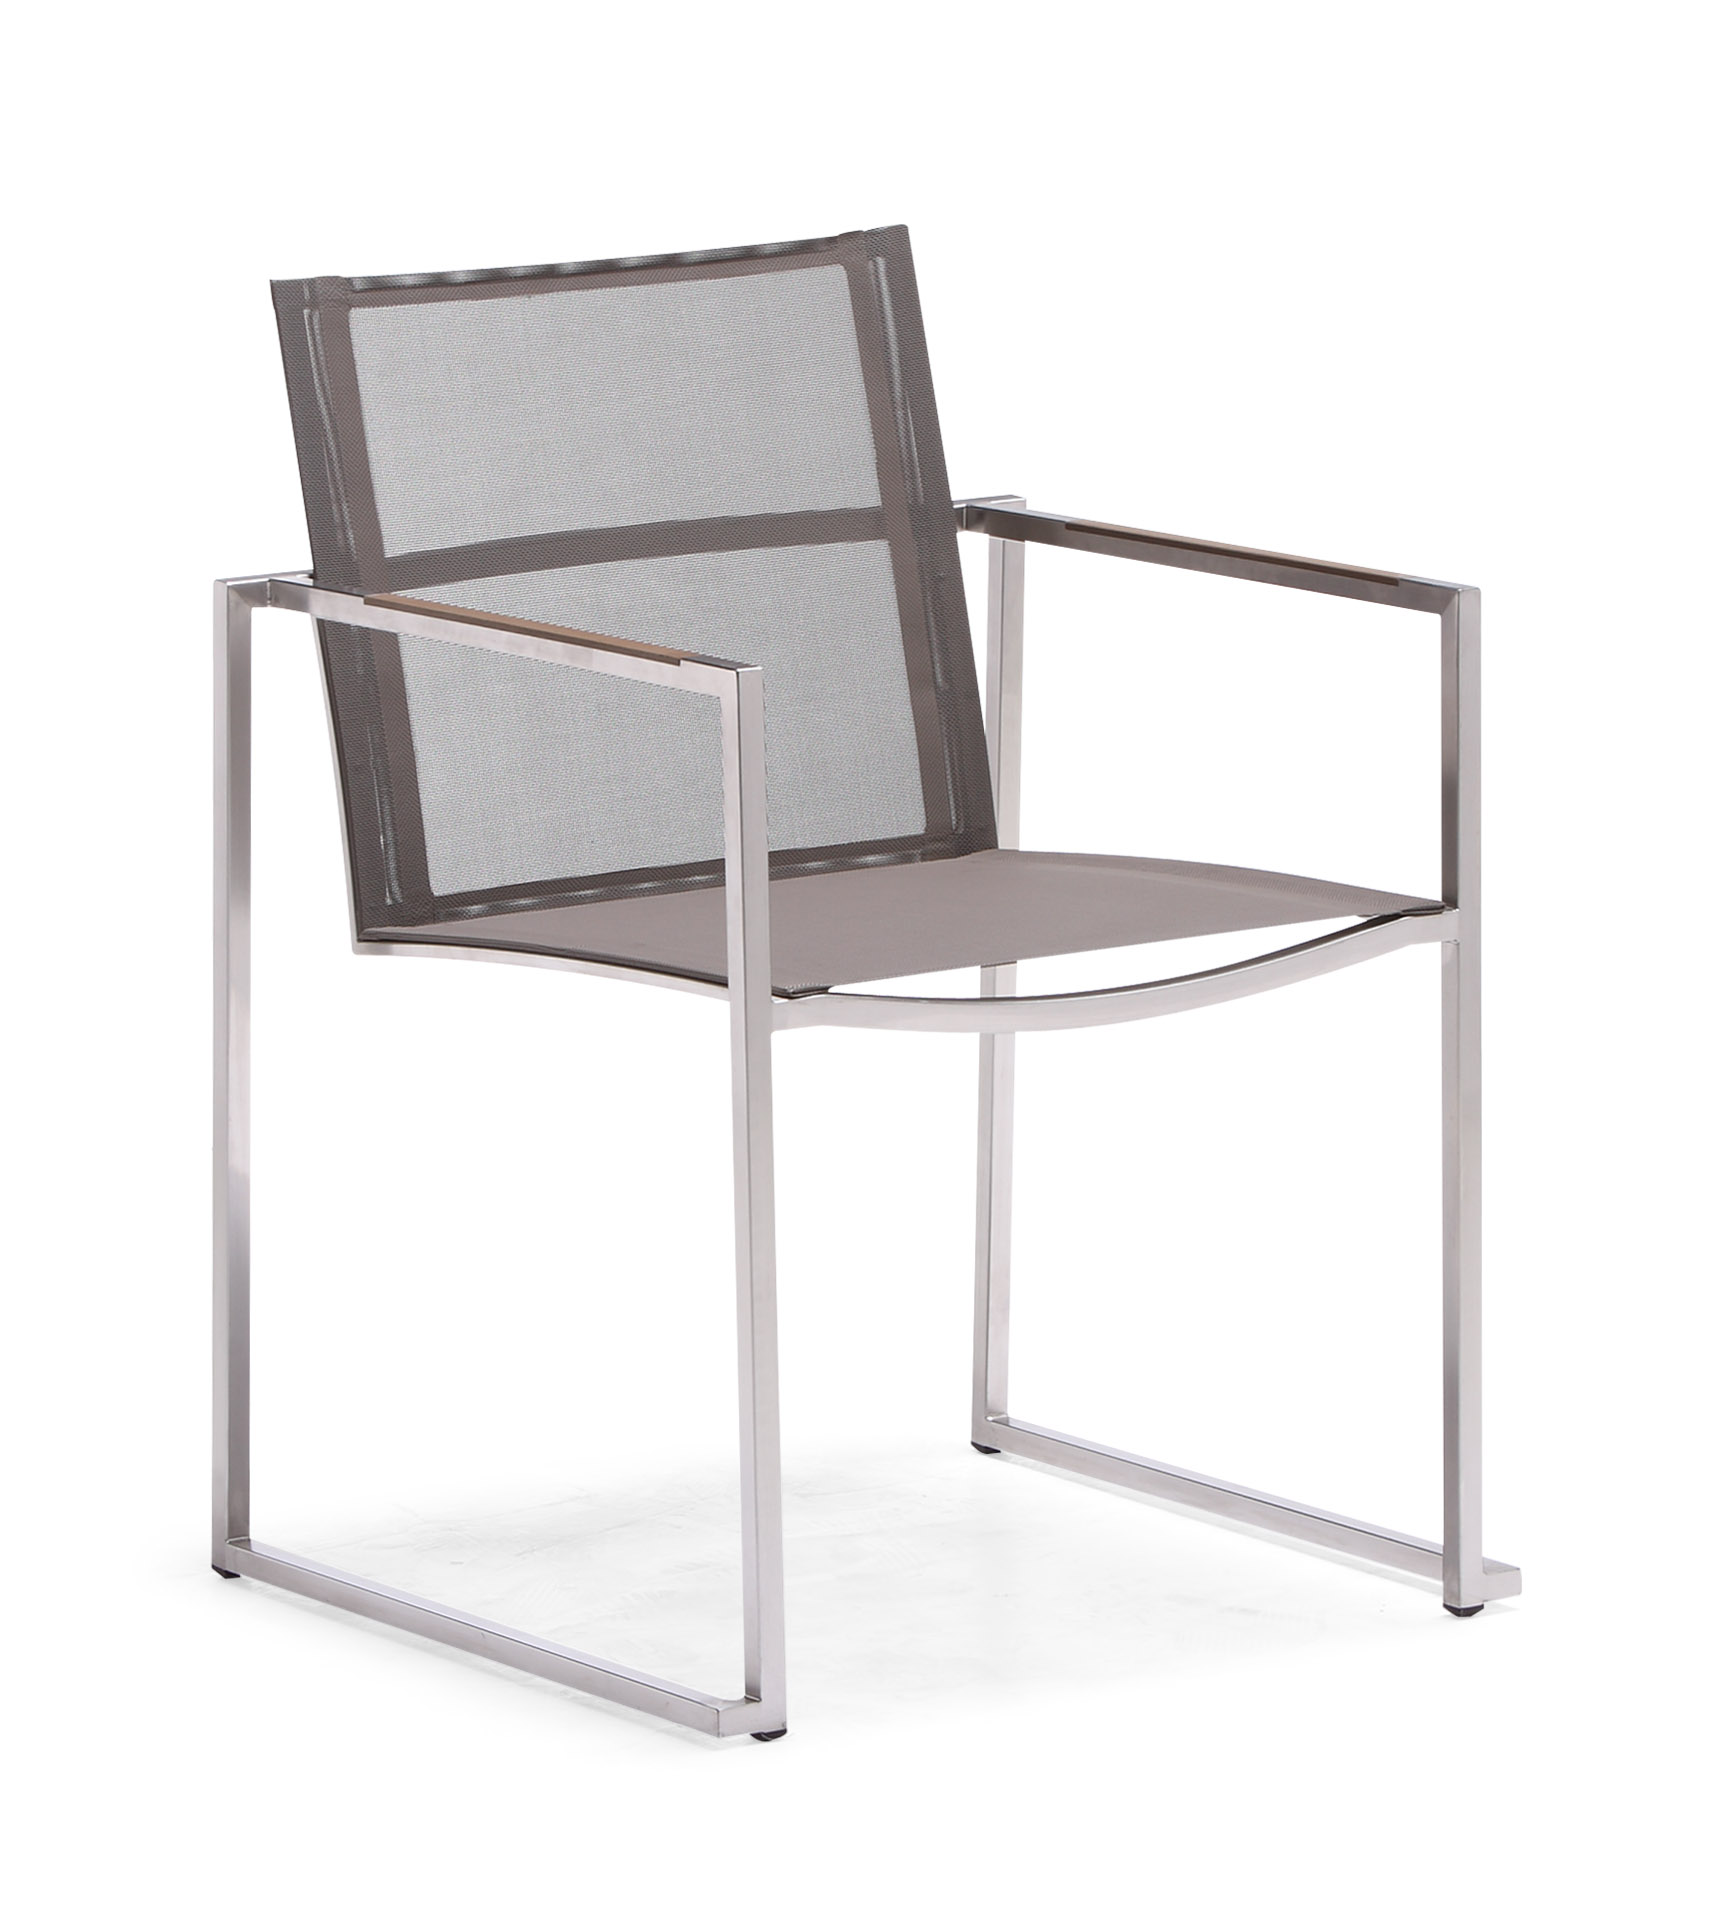 Modern stainless steel outdoor dining chair (Y040BF)